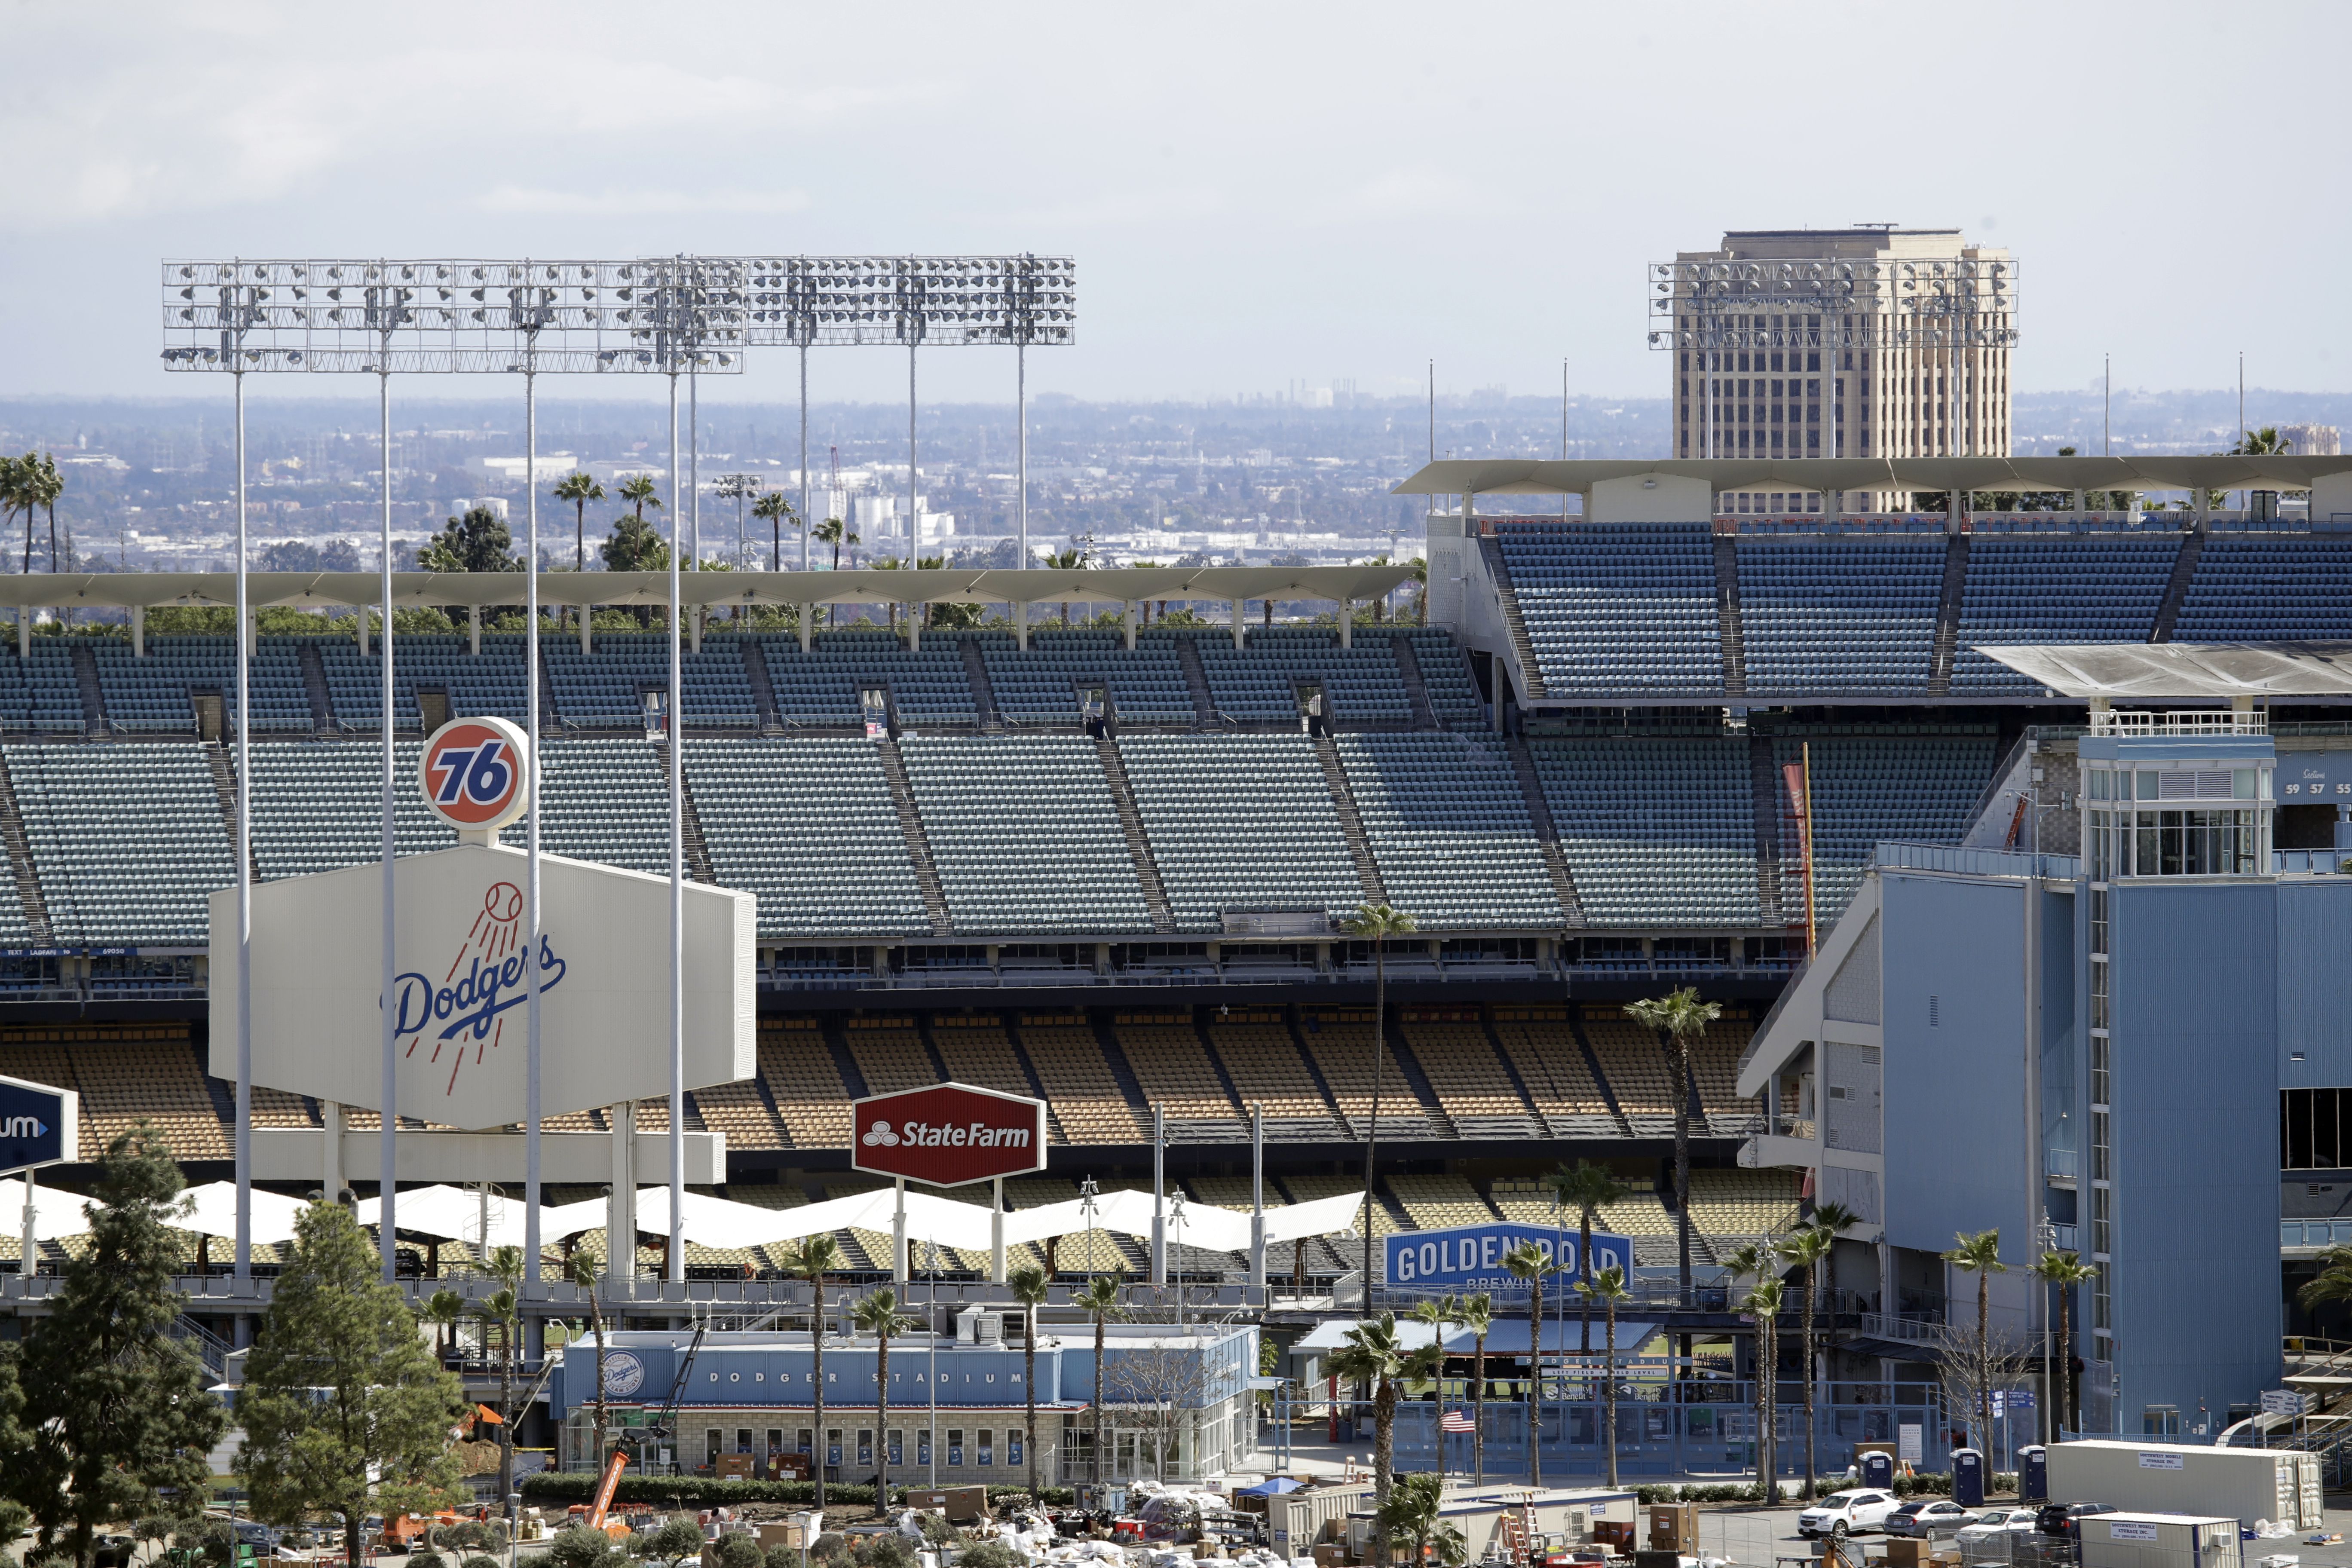 MLB Cancels All-Star Game for First Time Since 1945, Chicago News